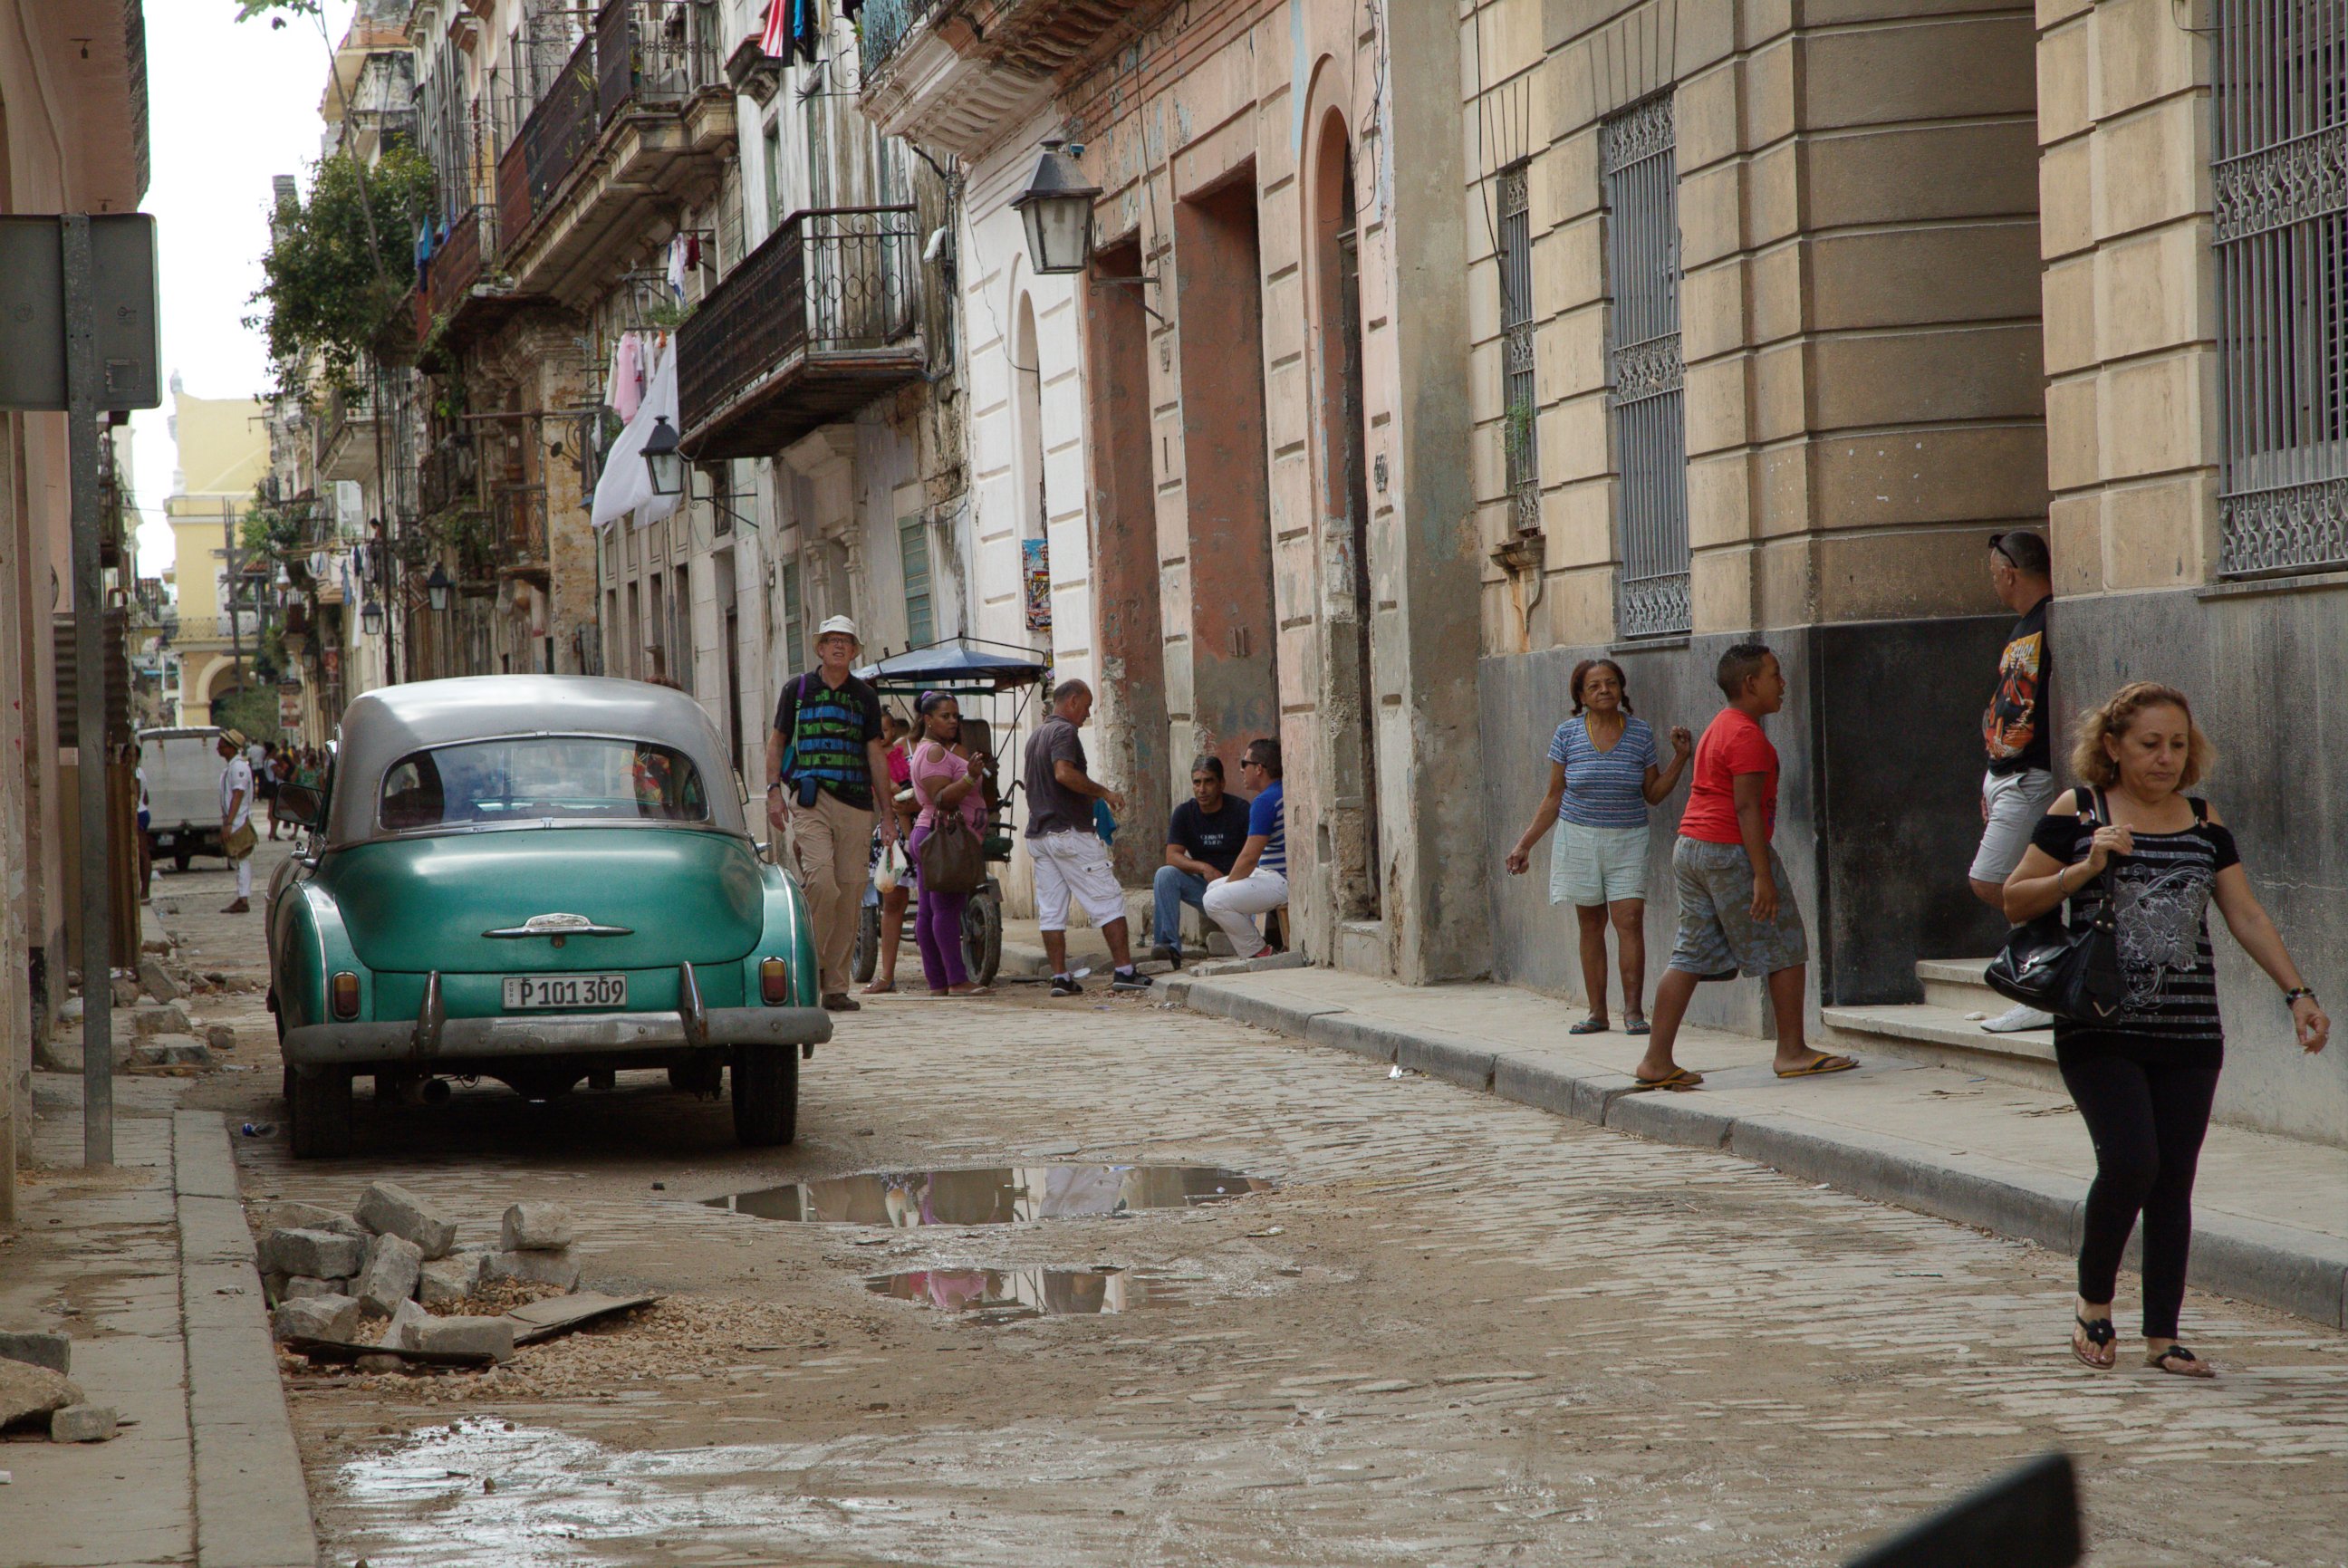 PHOTO: For the first time in more than 50 years, Cuba could finally open to American tourists.